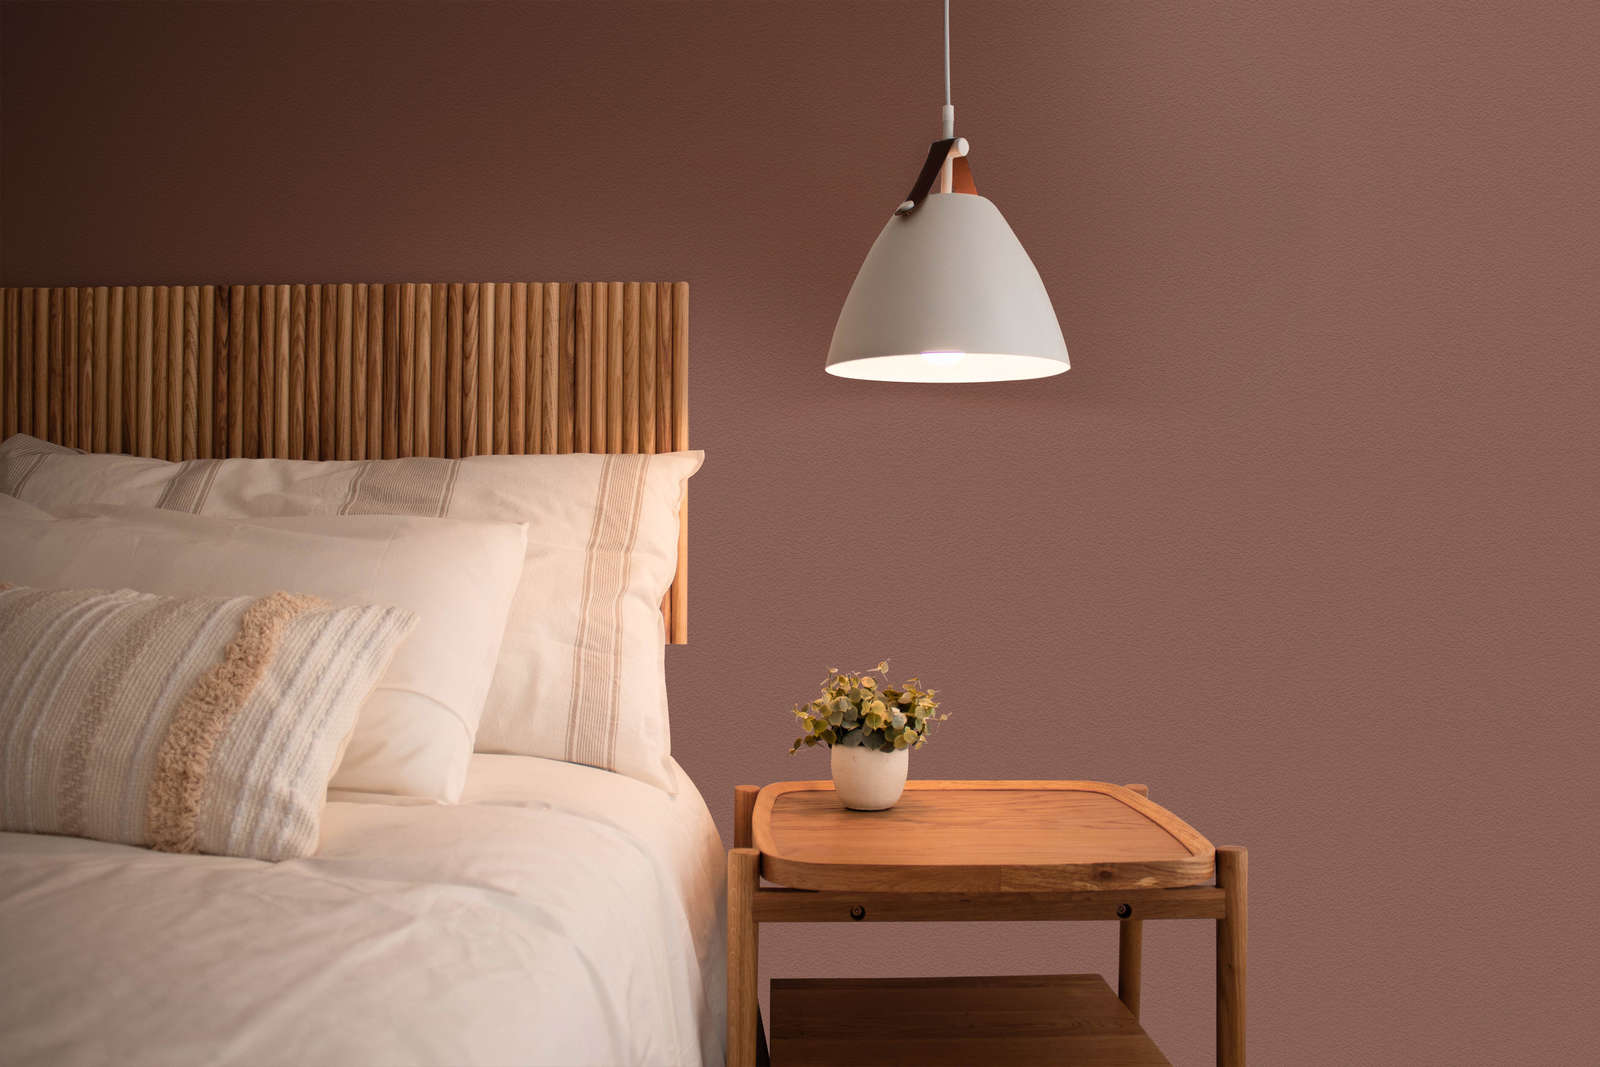             Wall Paint TCK5014 »Reddish Chestnut« in magnificent red-brown – 5.0 litre
        